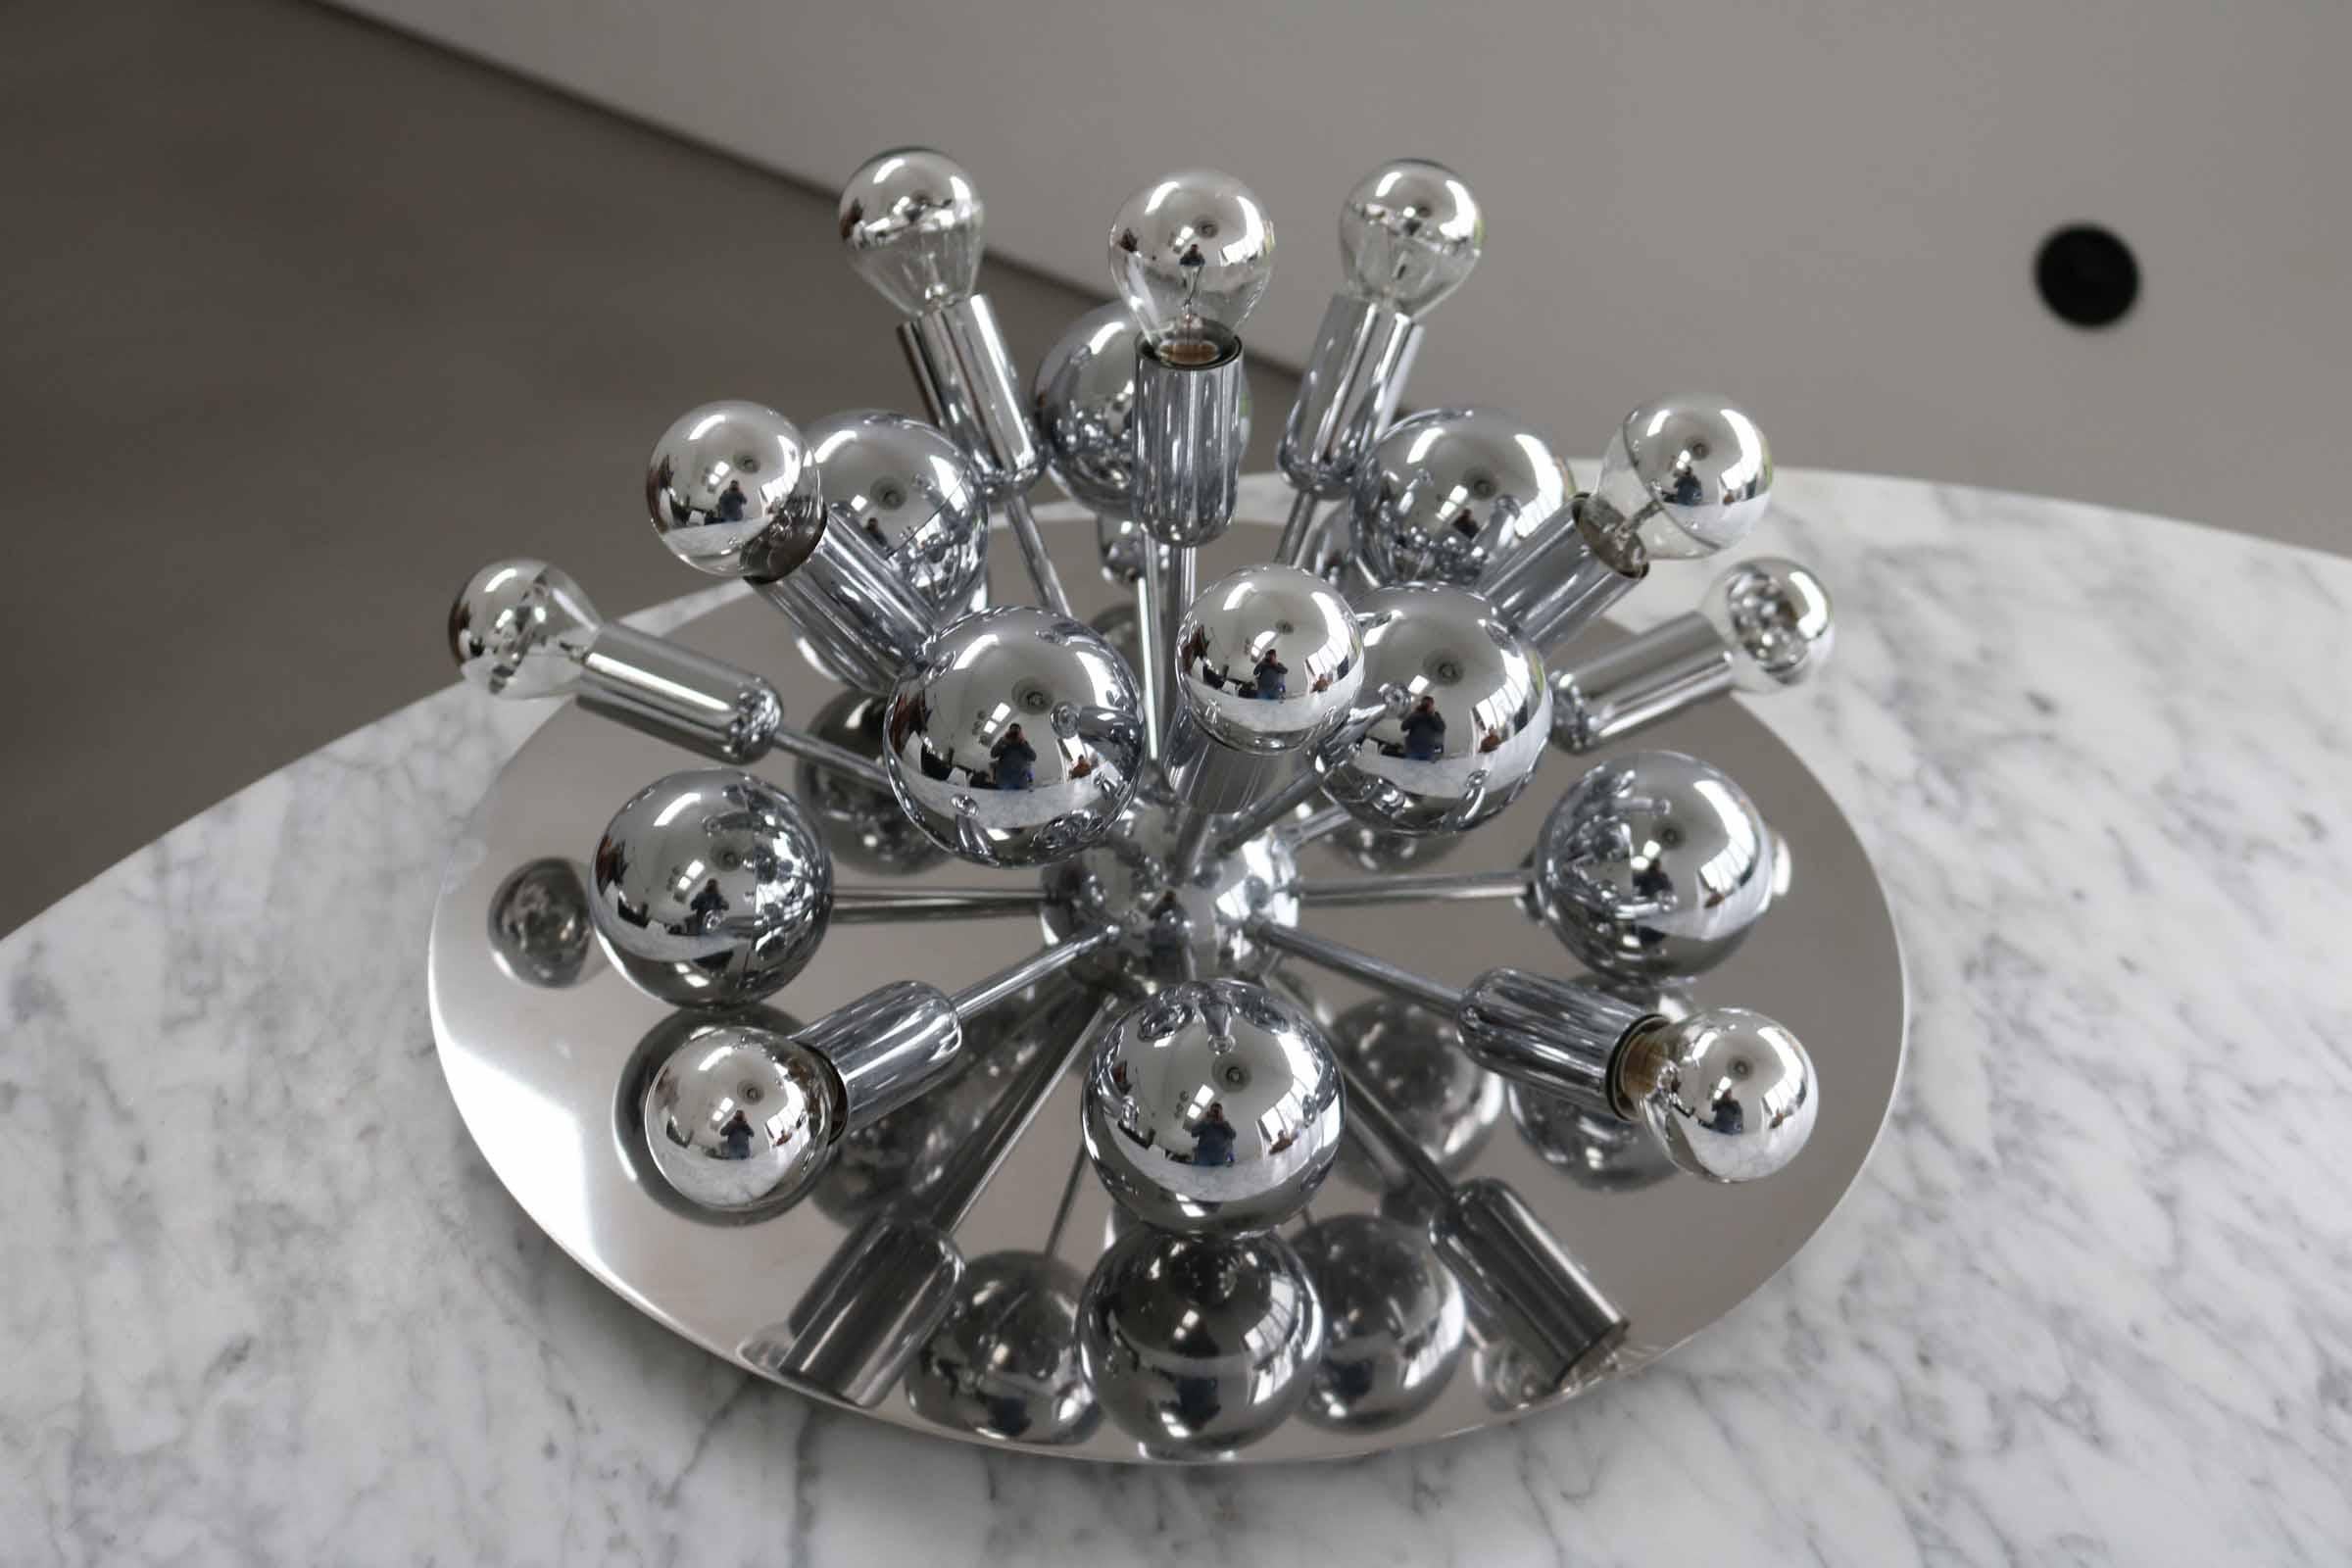 Large Cosack Sputnik Space Age flushmount or wall lamp in chrome in excellent condition.
E27 / Model A bulbs.